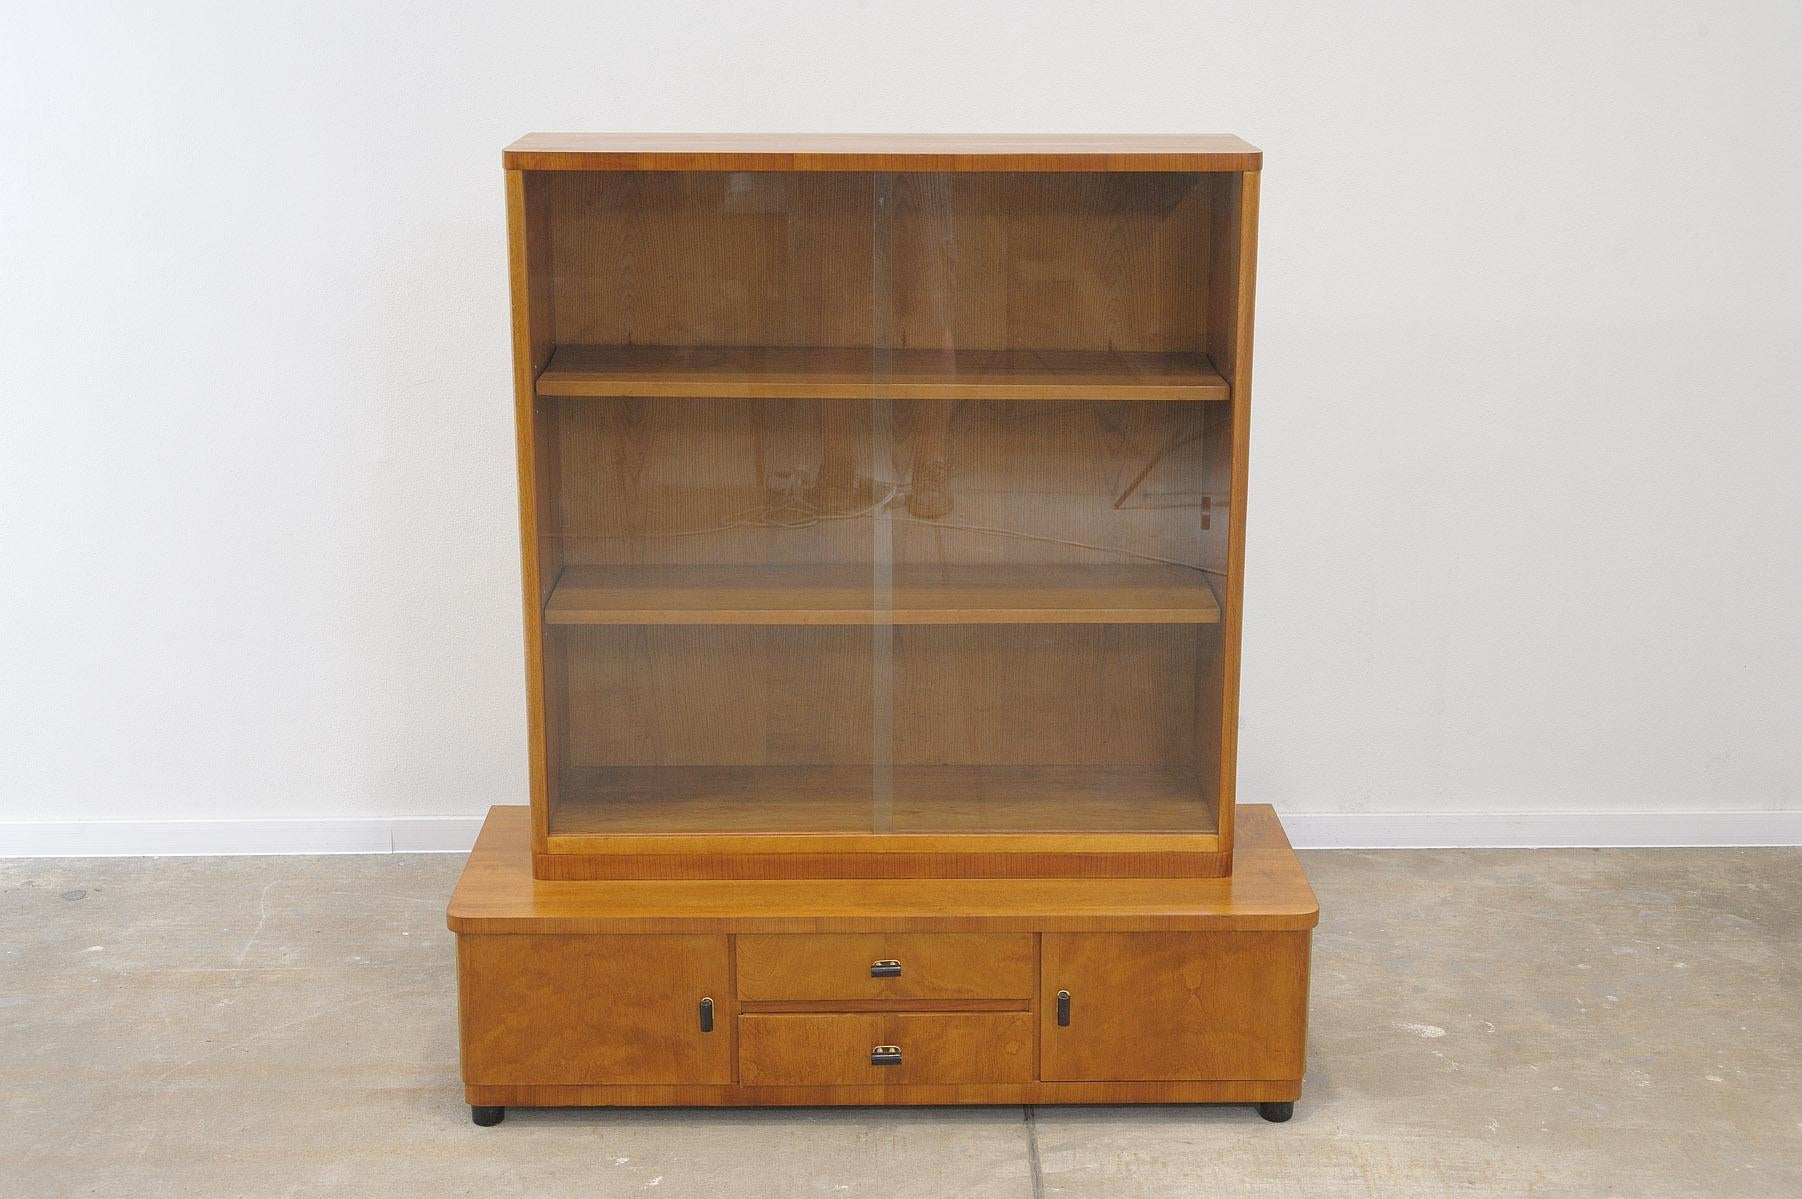 This bookcase was made in the former Czechoslovakia in the 1930´s.

the library consists of two parts that can be separated from each other. Upper glazed and lower with storage areas.
The library is quite easy to handle.

It features a regular